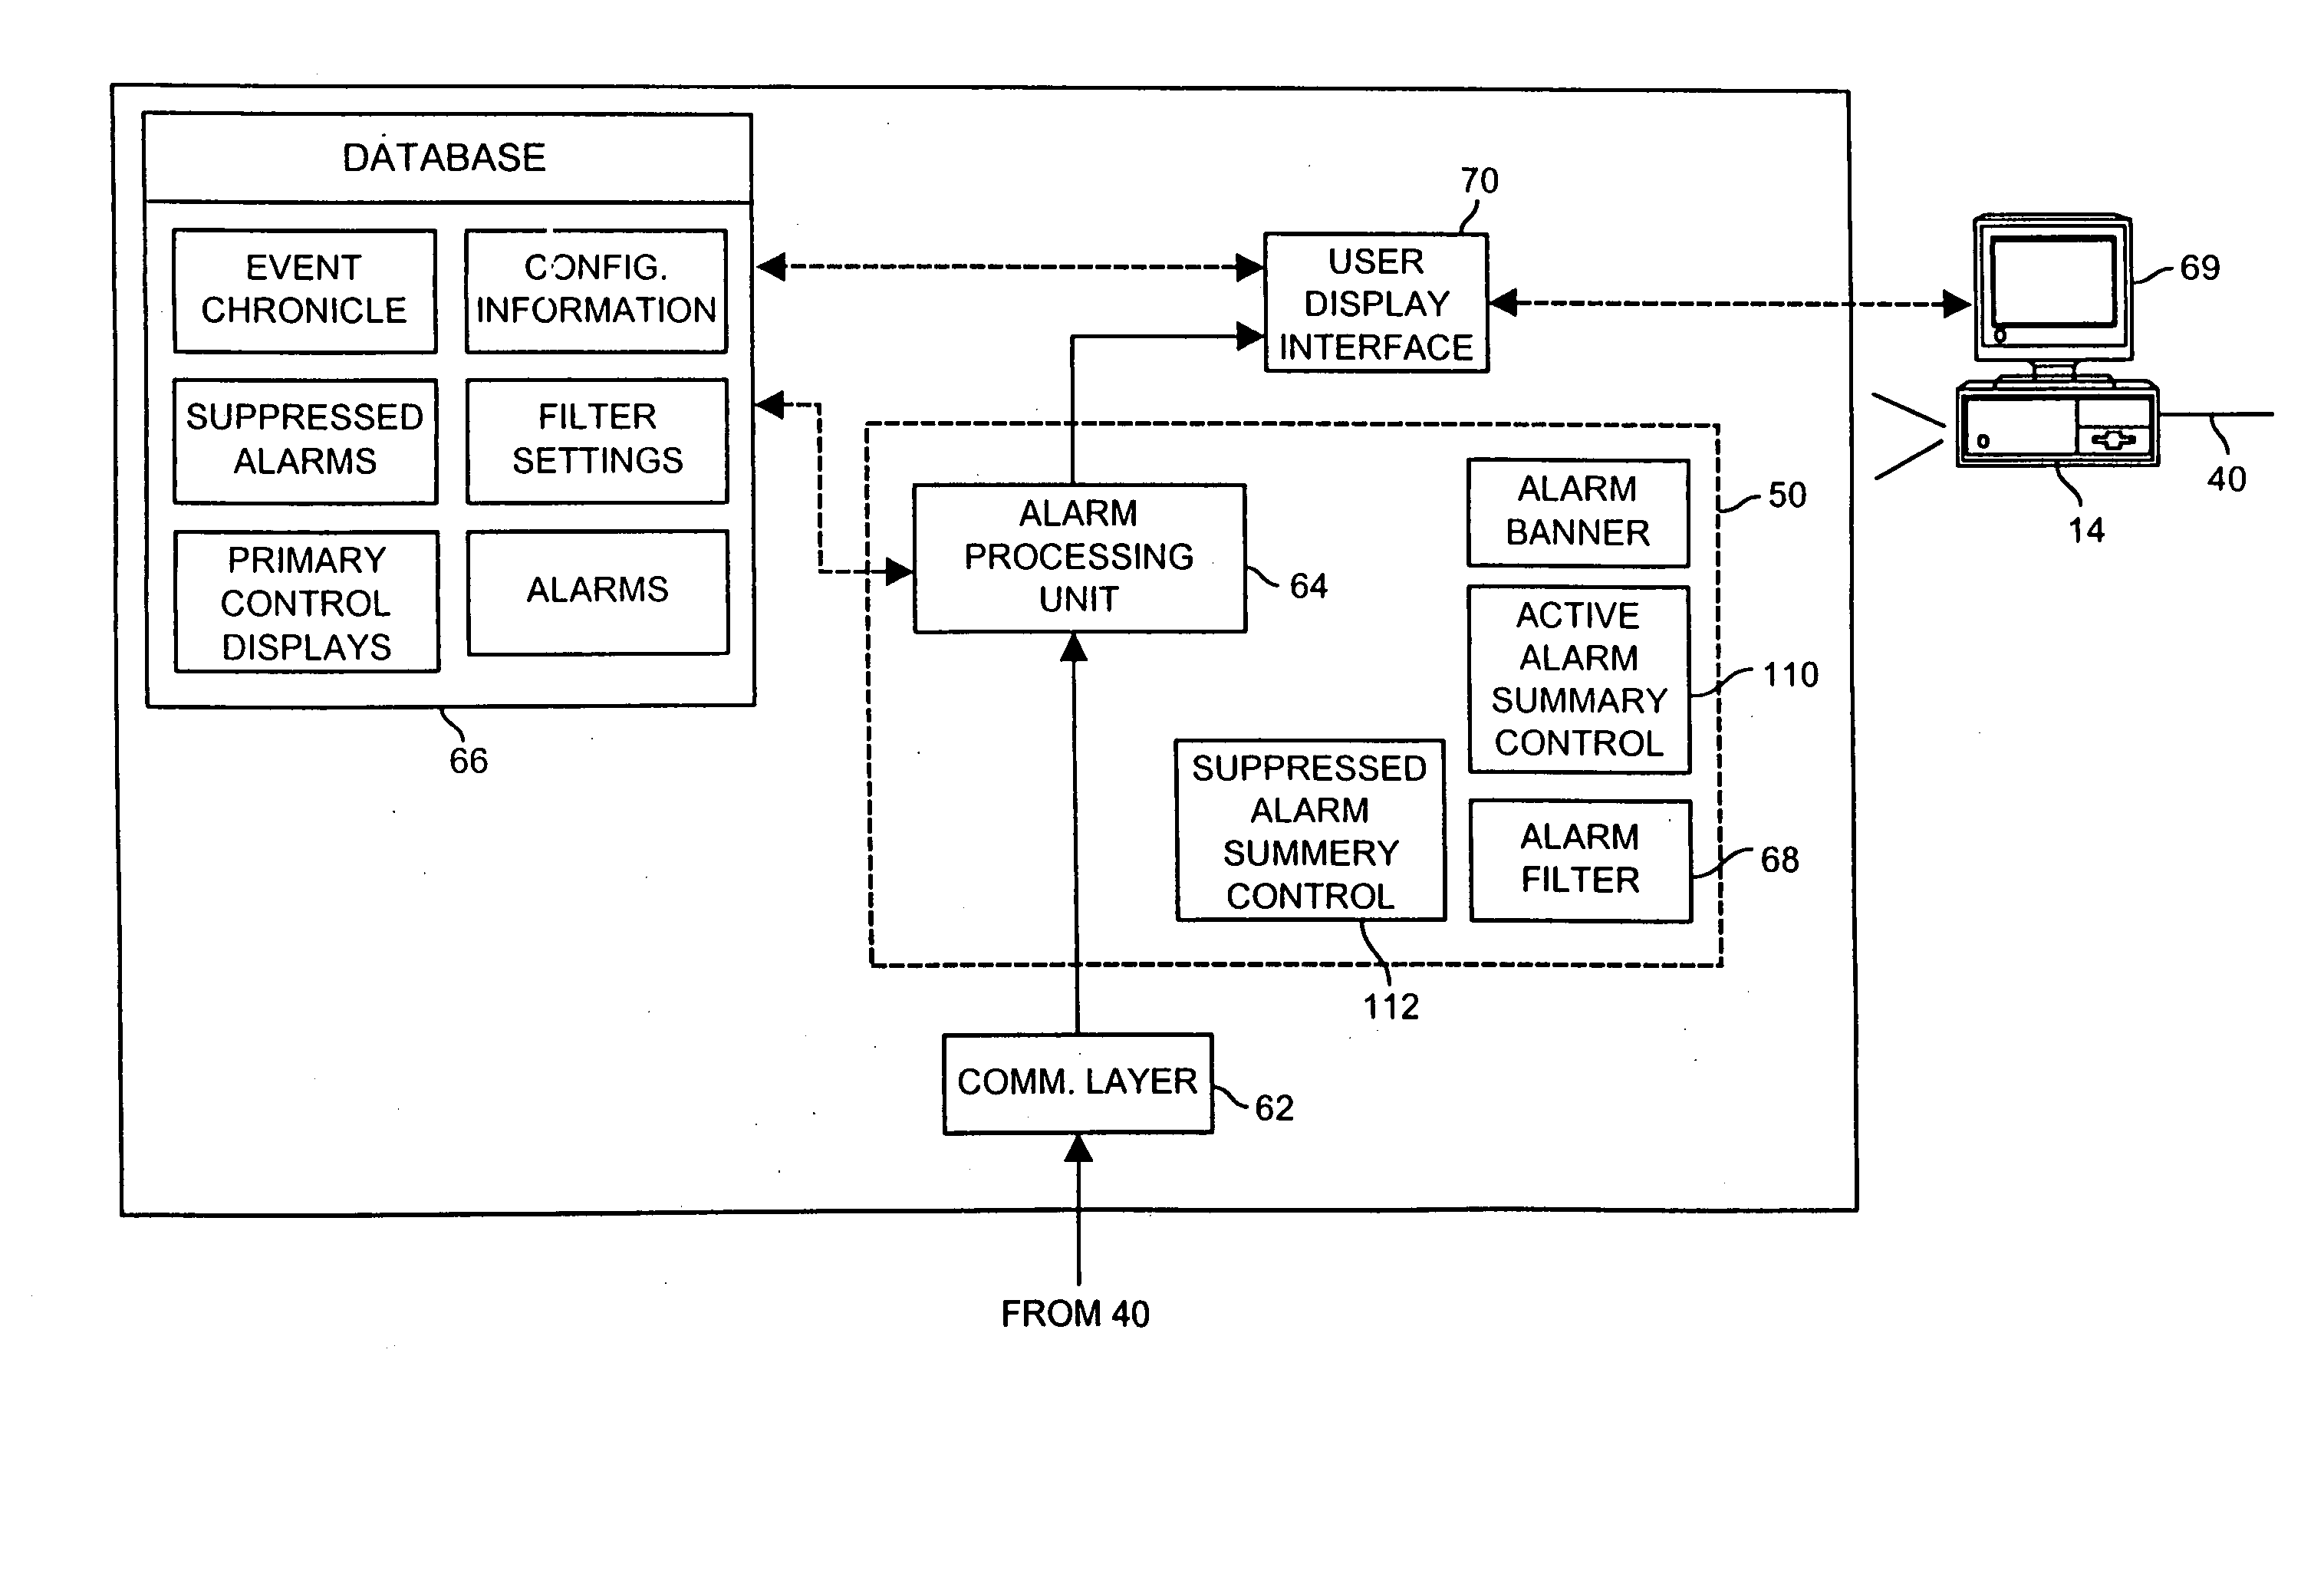 Integrated alarm display in a process control network